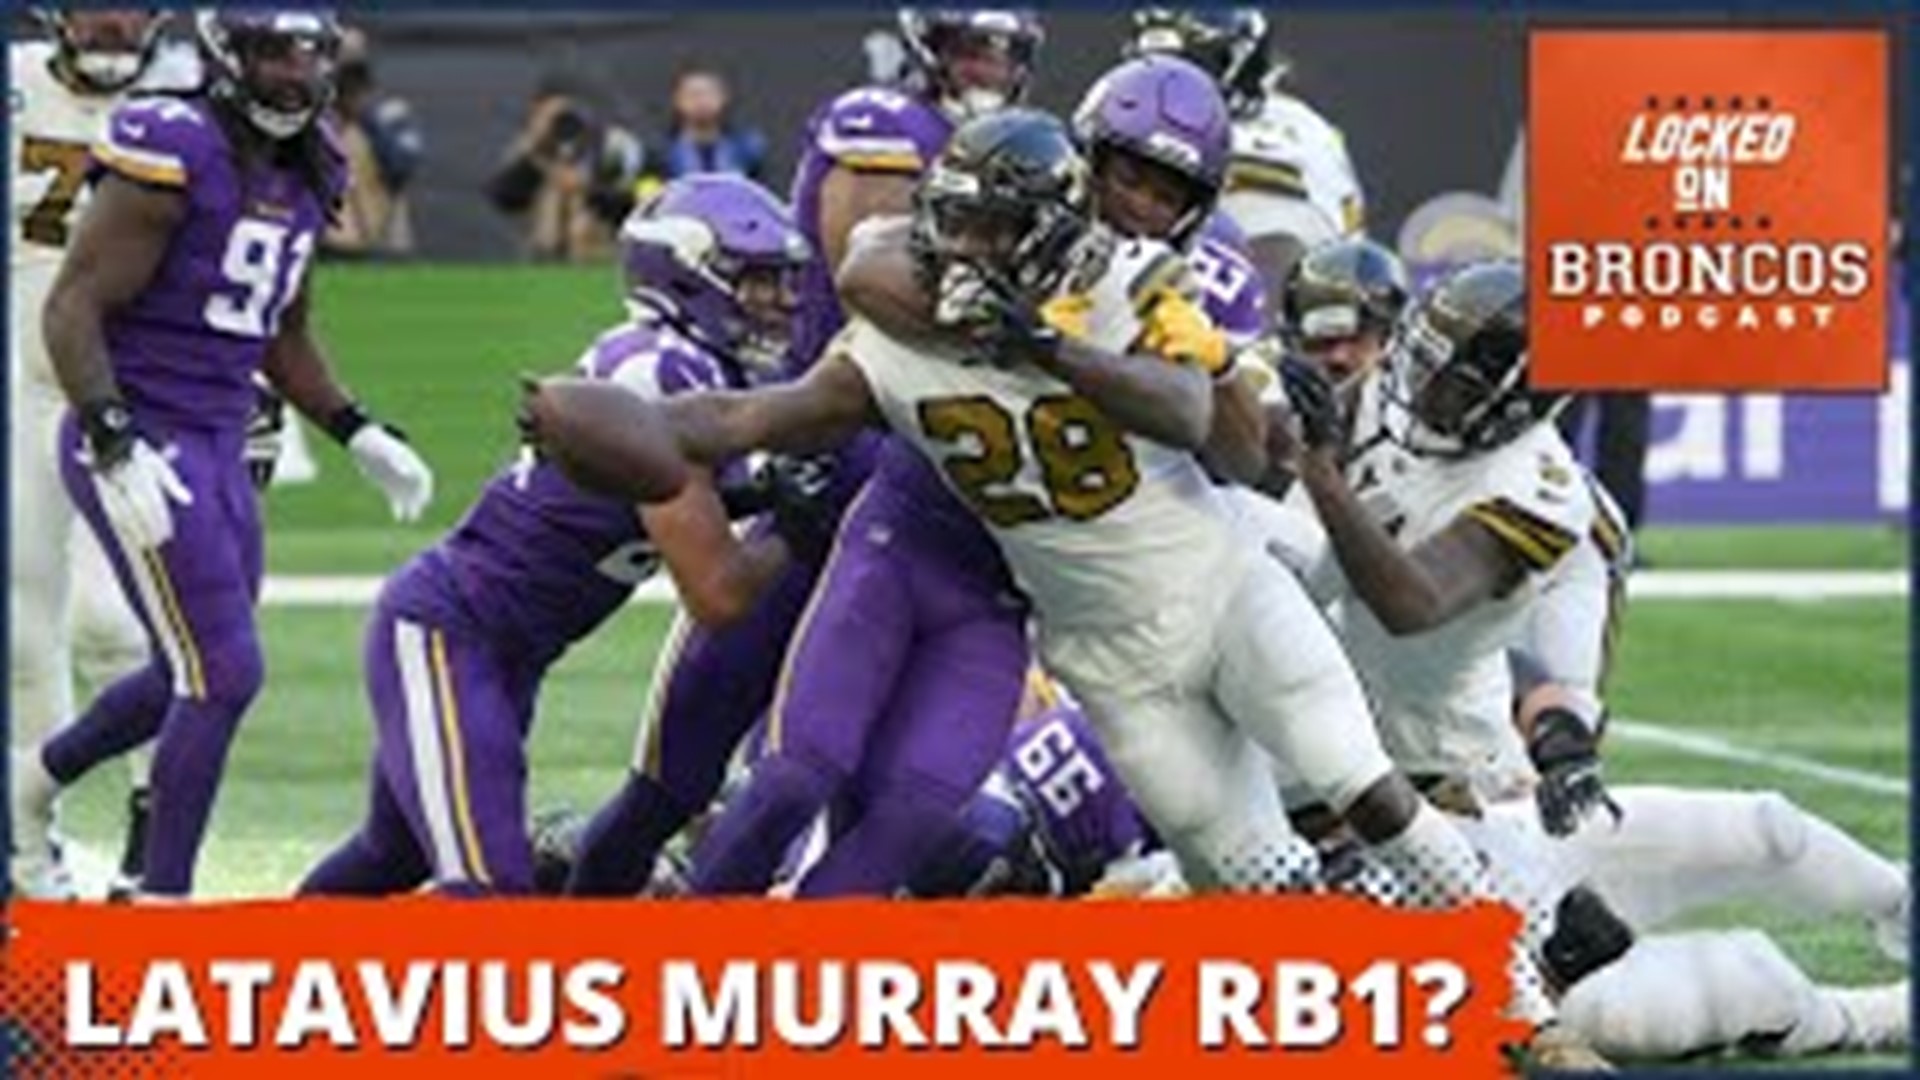 Will Latavius Murray play for the Denver Broncos on Thursday Night Football against the Indianapolis Colts?